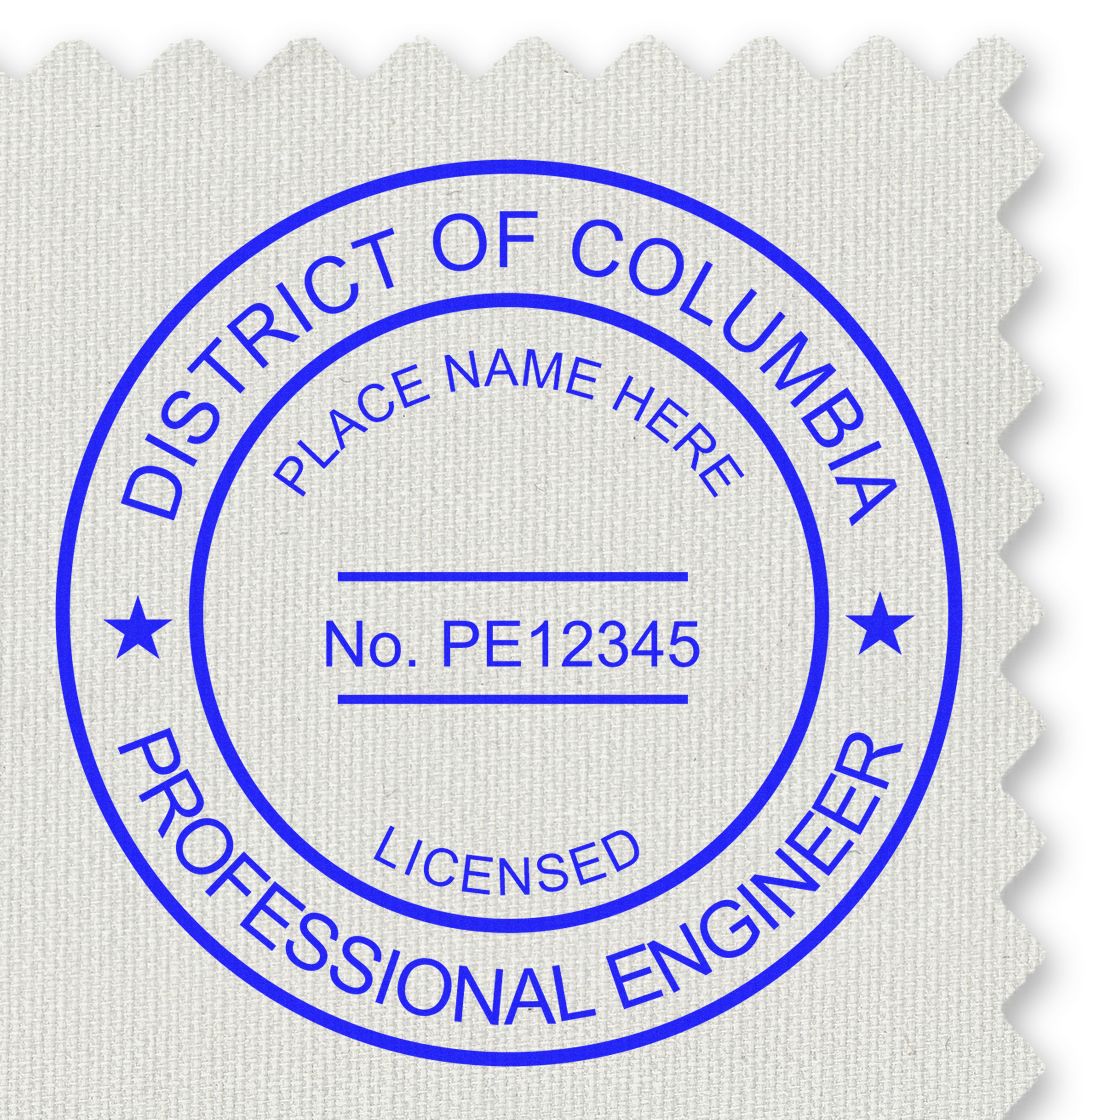 The Digital District of Columbia PE Stamp and Electronic Seal for District of Columbia Engineer stamp impression comes to life with a crisp, detailed photo on paper - showcasing true professional quality.